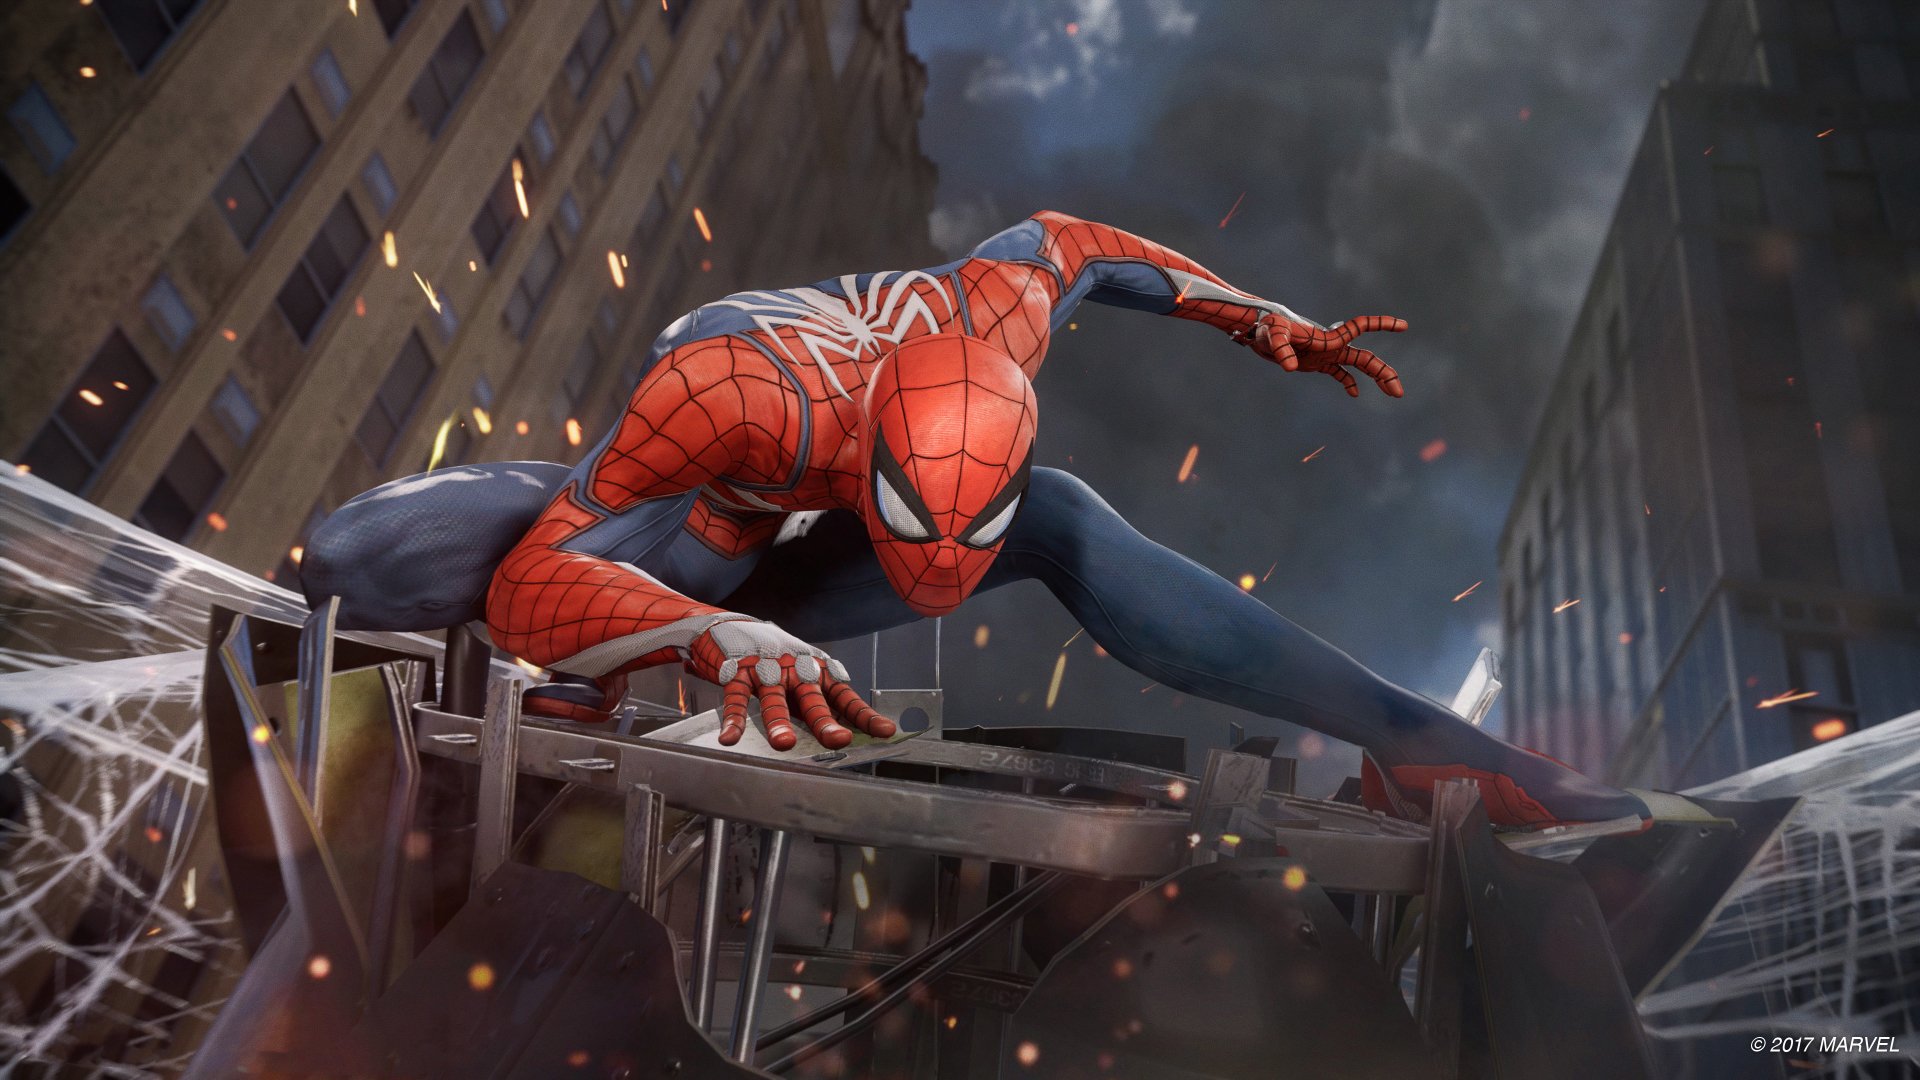 174 Spider Man PS4 HD Wallpapers Background Images   Wallpaper